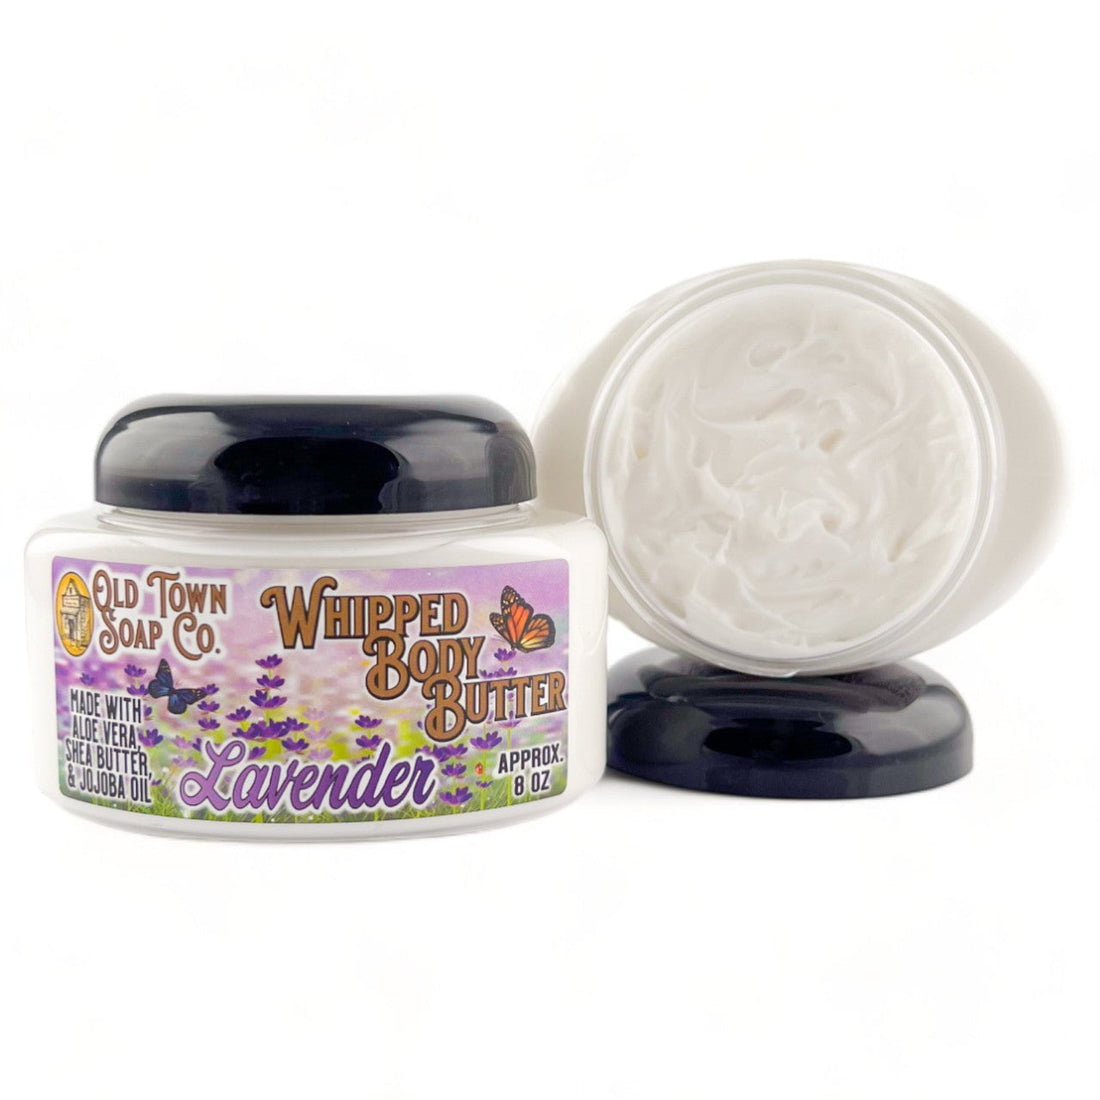 Lavender -Whipped Body Butter - Old Town Soap Co.